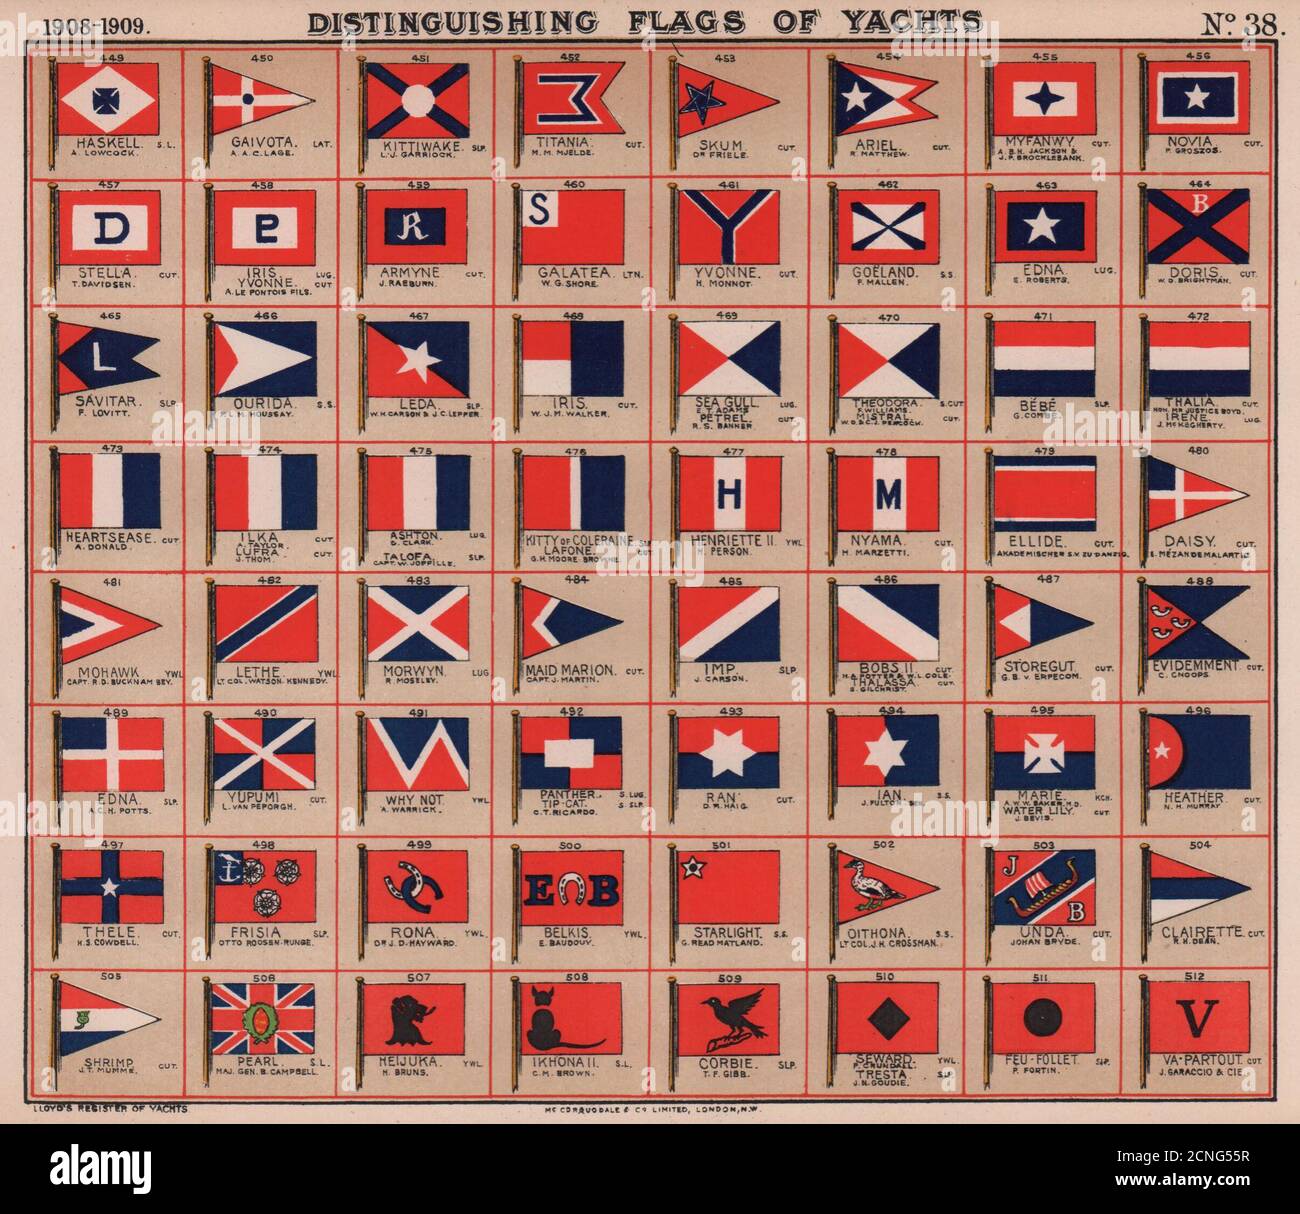 YACHT FLAGS. Red, White & Blue. Red & Black 1908 old antique print picture  Stock Photo - Alamy